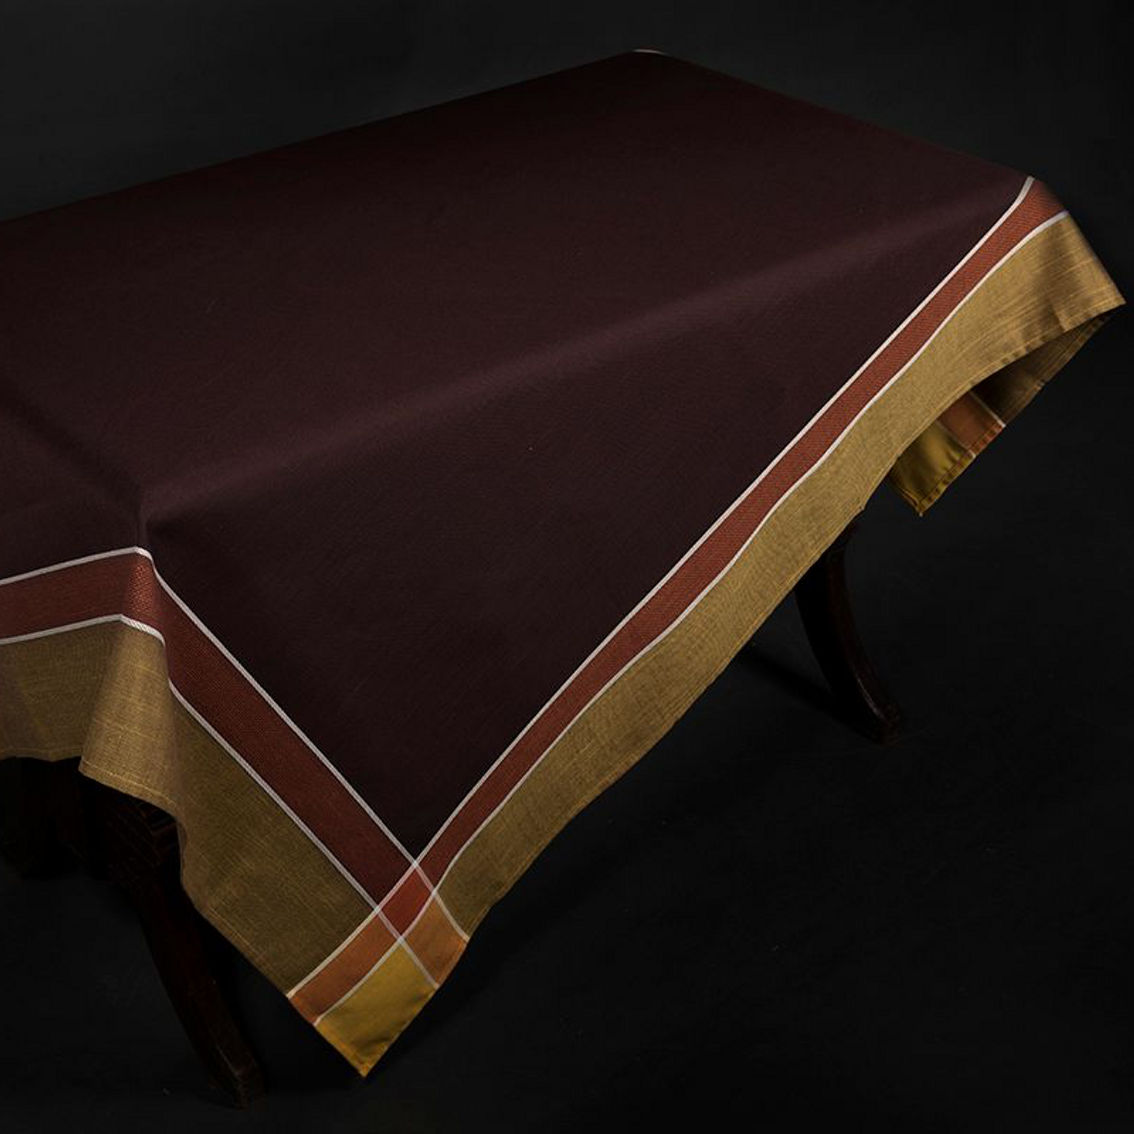 Xia Home Fashions,  Riviera Table Linens 60-Inch By 118-Inch Tablecloth, Coffee - Image 2 of 2